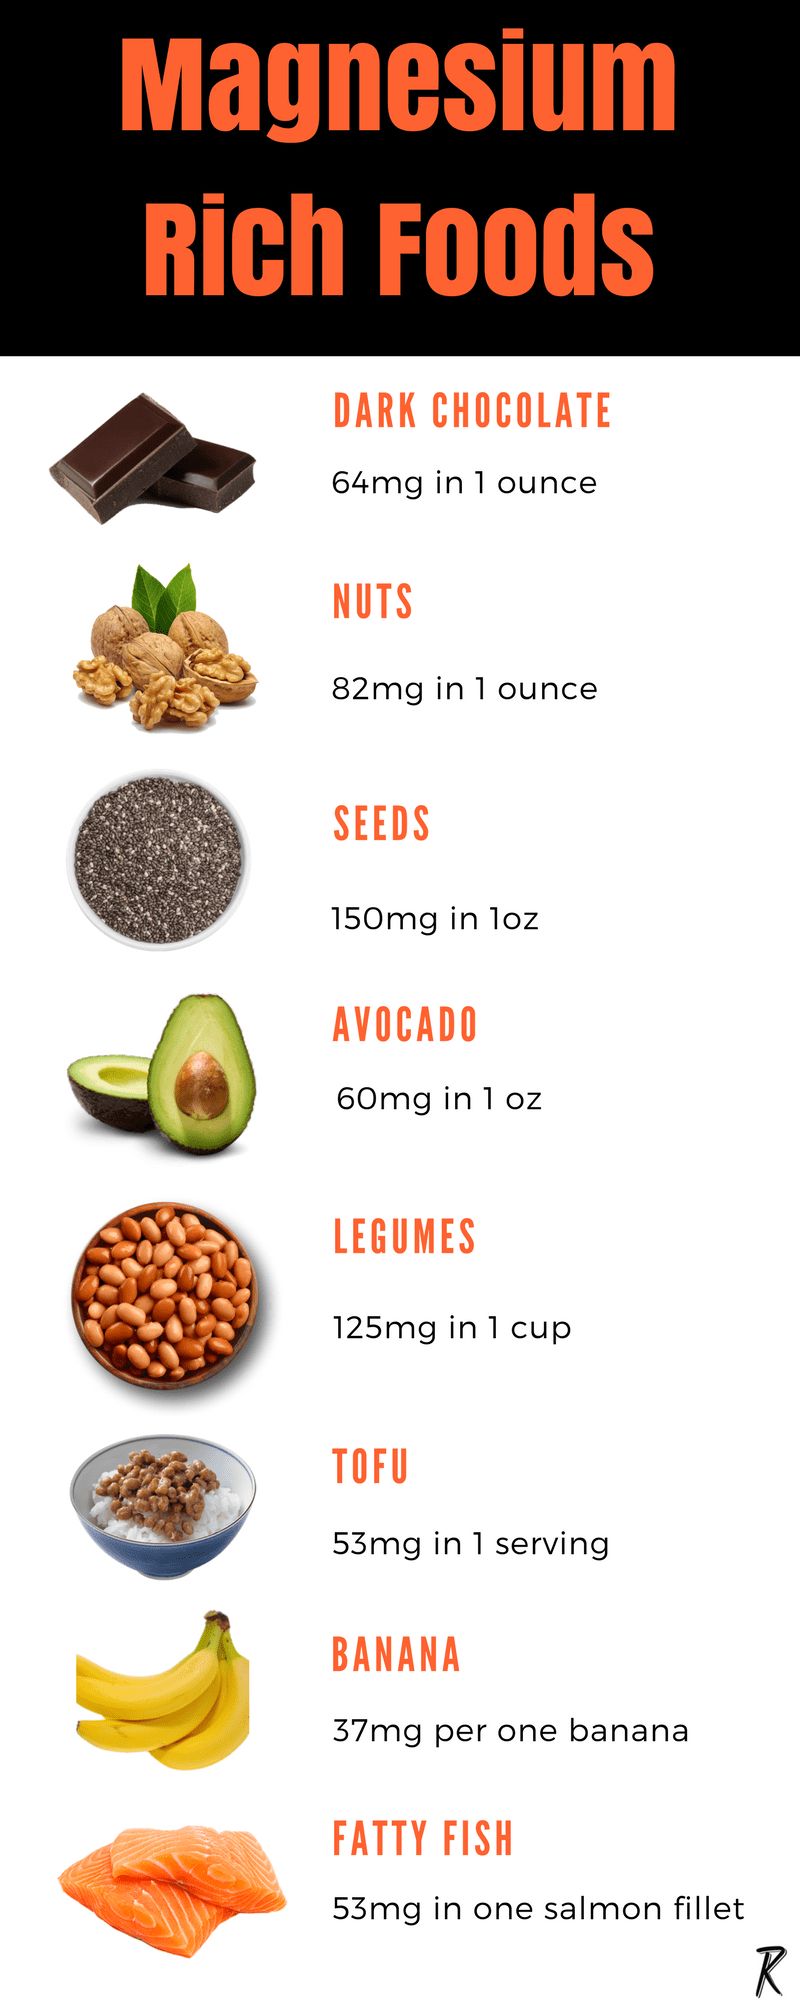 Magnesium Rich Foods – What to Eat to Up Your Magnesium Consumption?